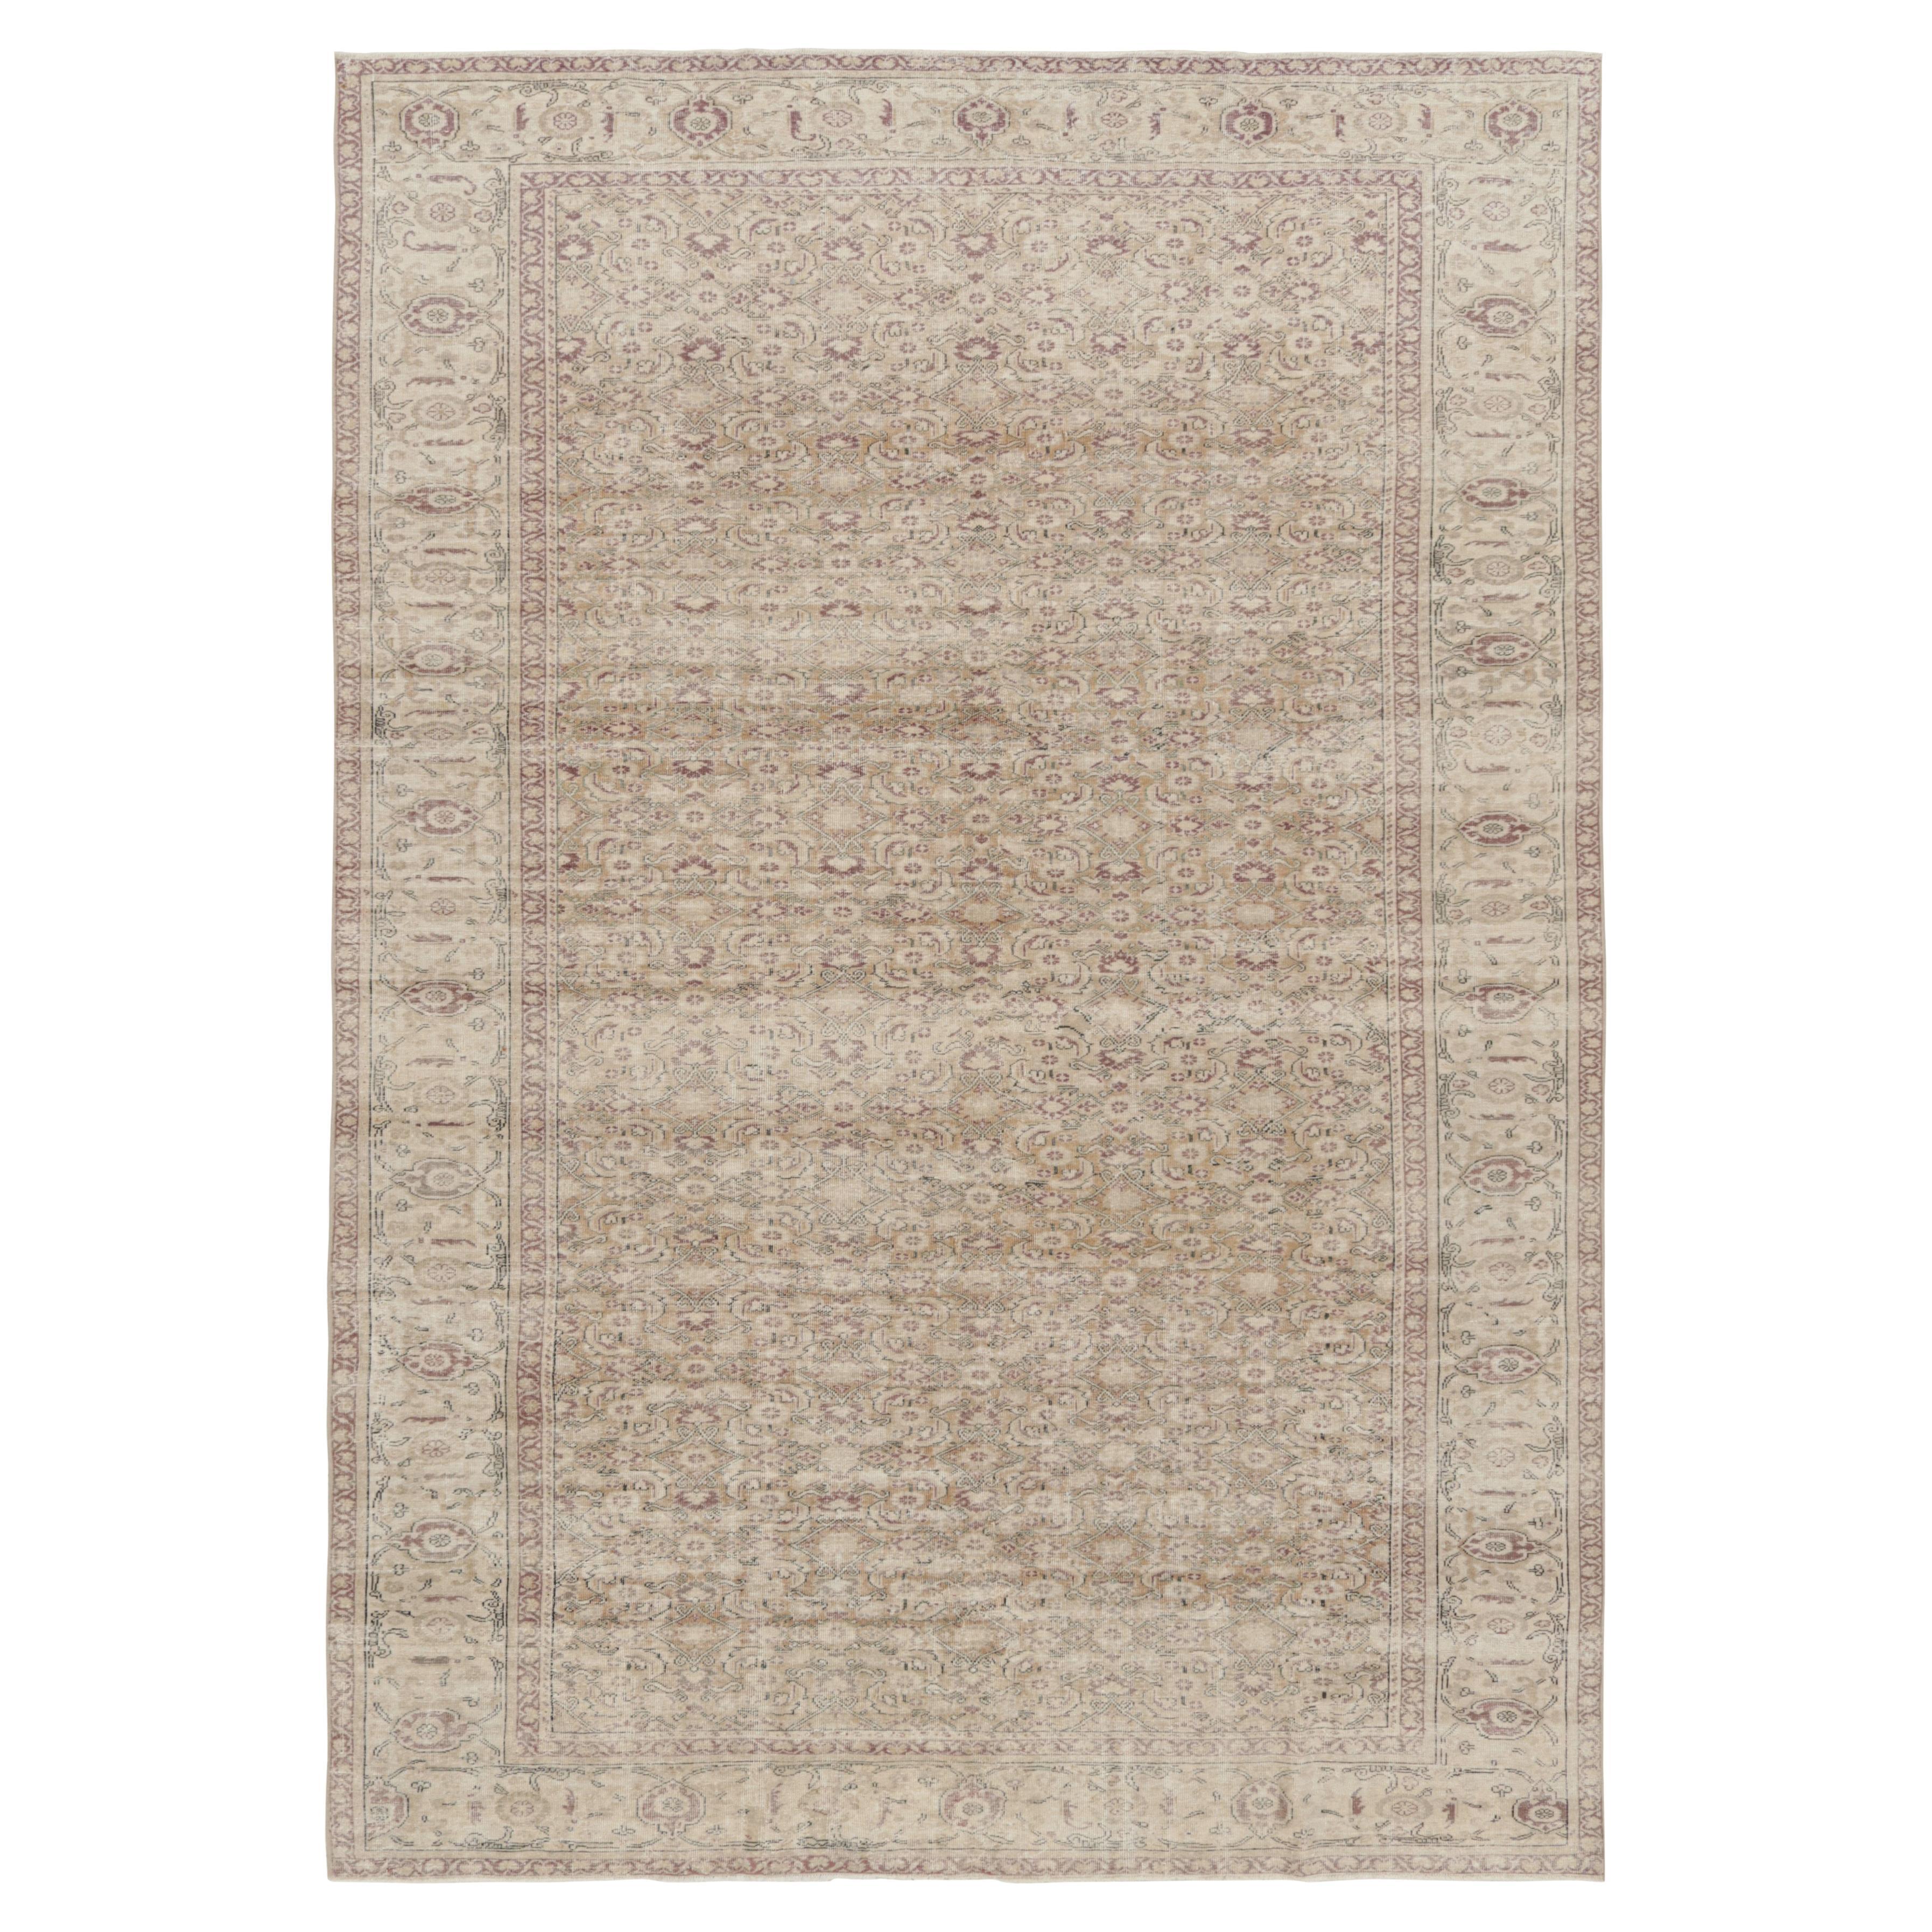 Vintage Kayseri Rug in Gold and Beige with Floral Patterns, from Rug & Kilim For Sale